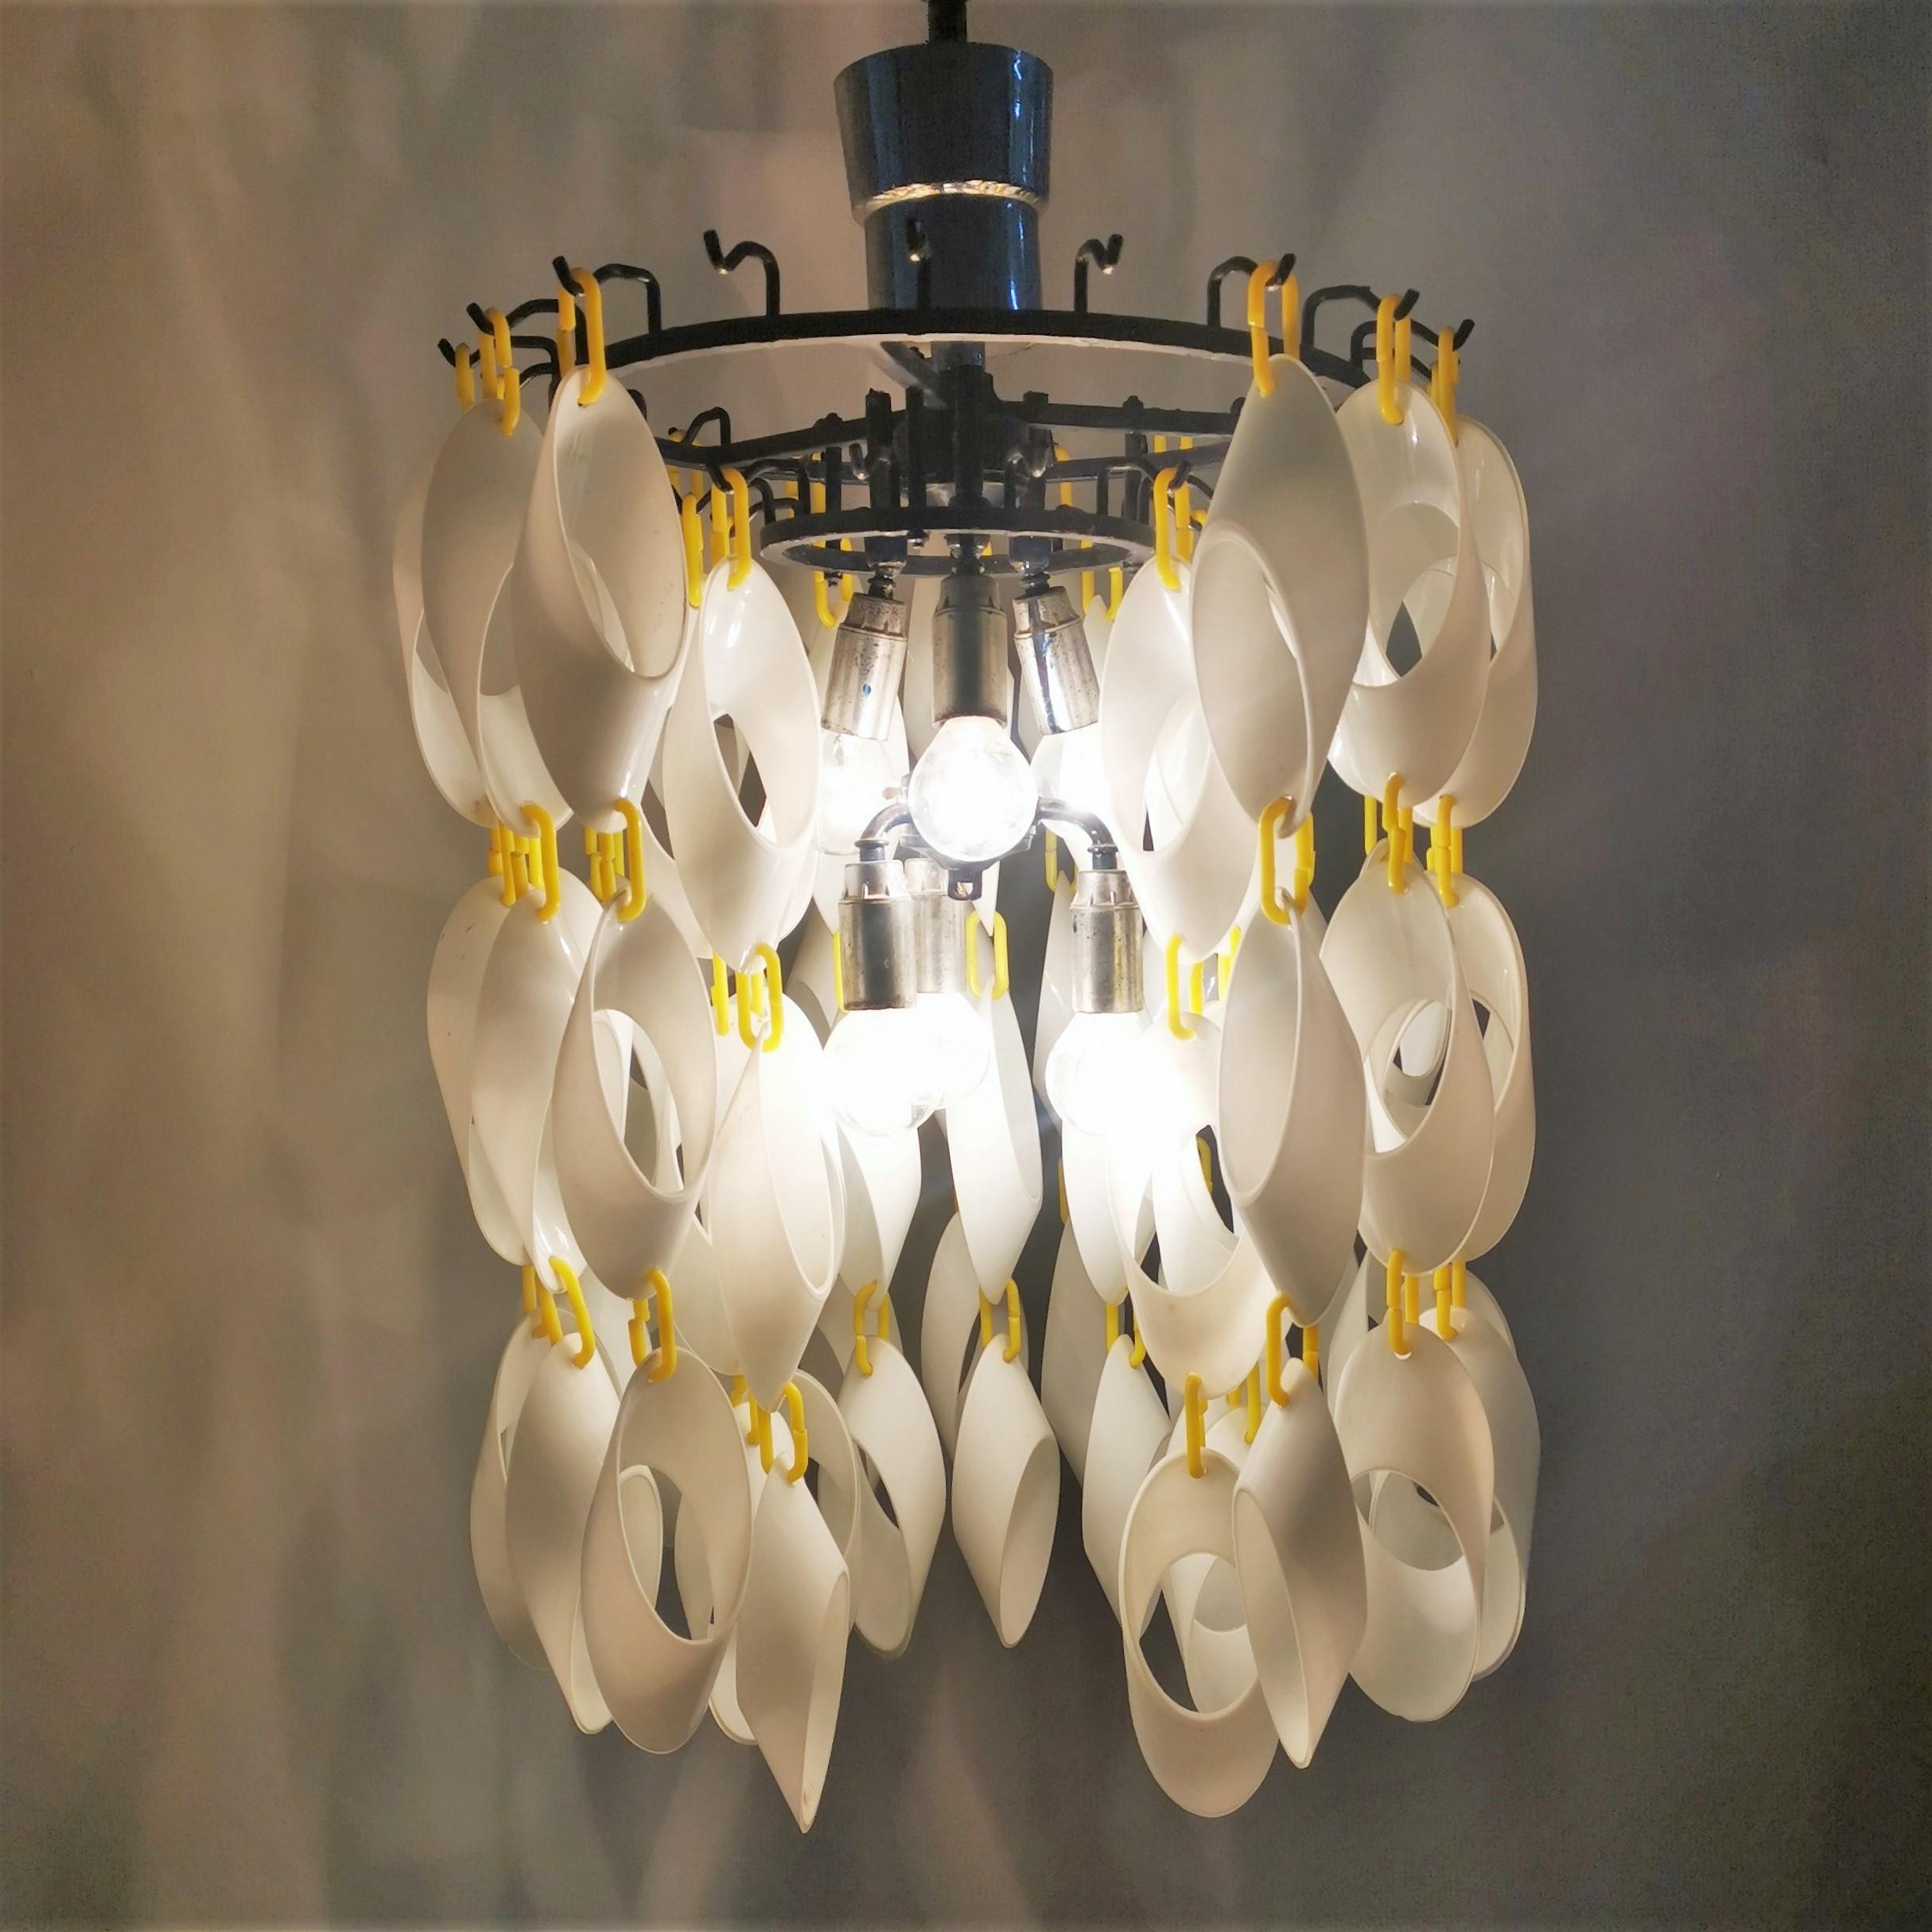 Mid-Century Vistosi Glass Chandelier Made of Modular Elements 1960s Italy For Sale 8